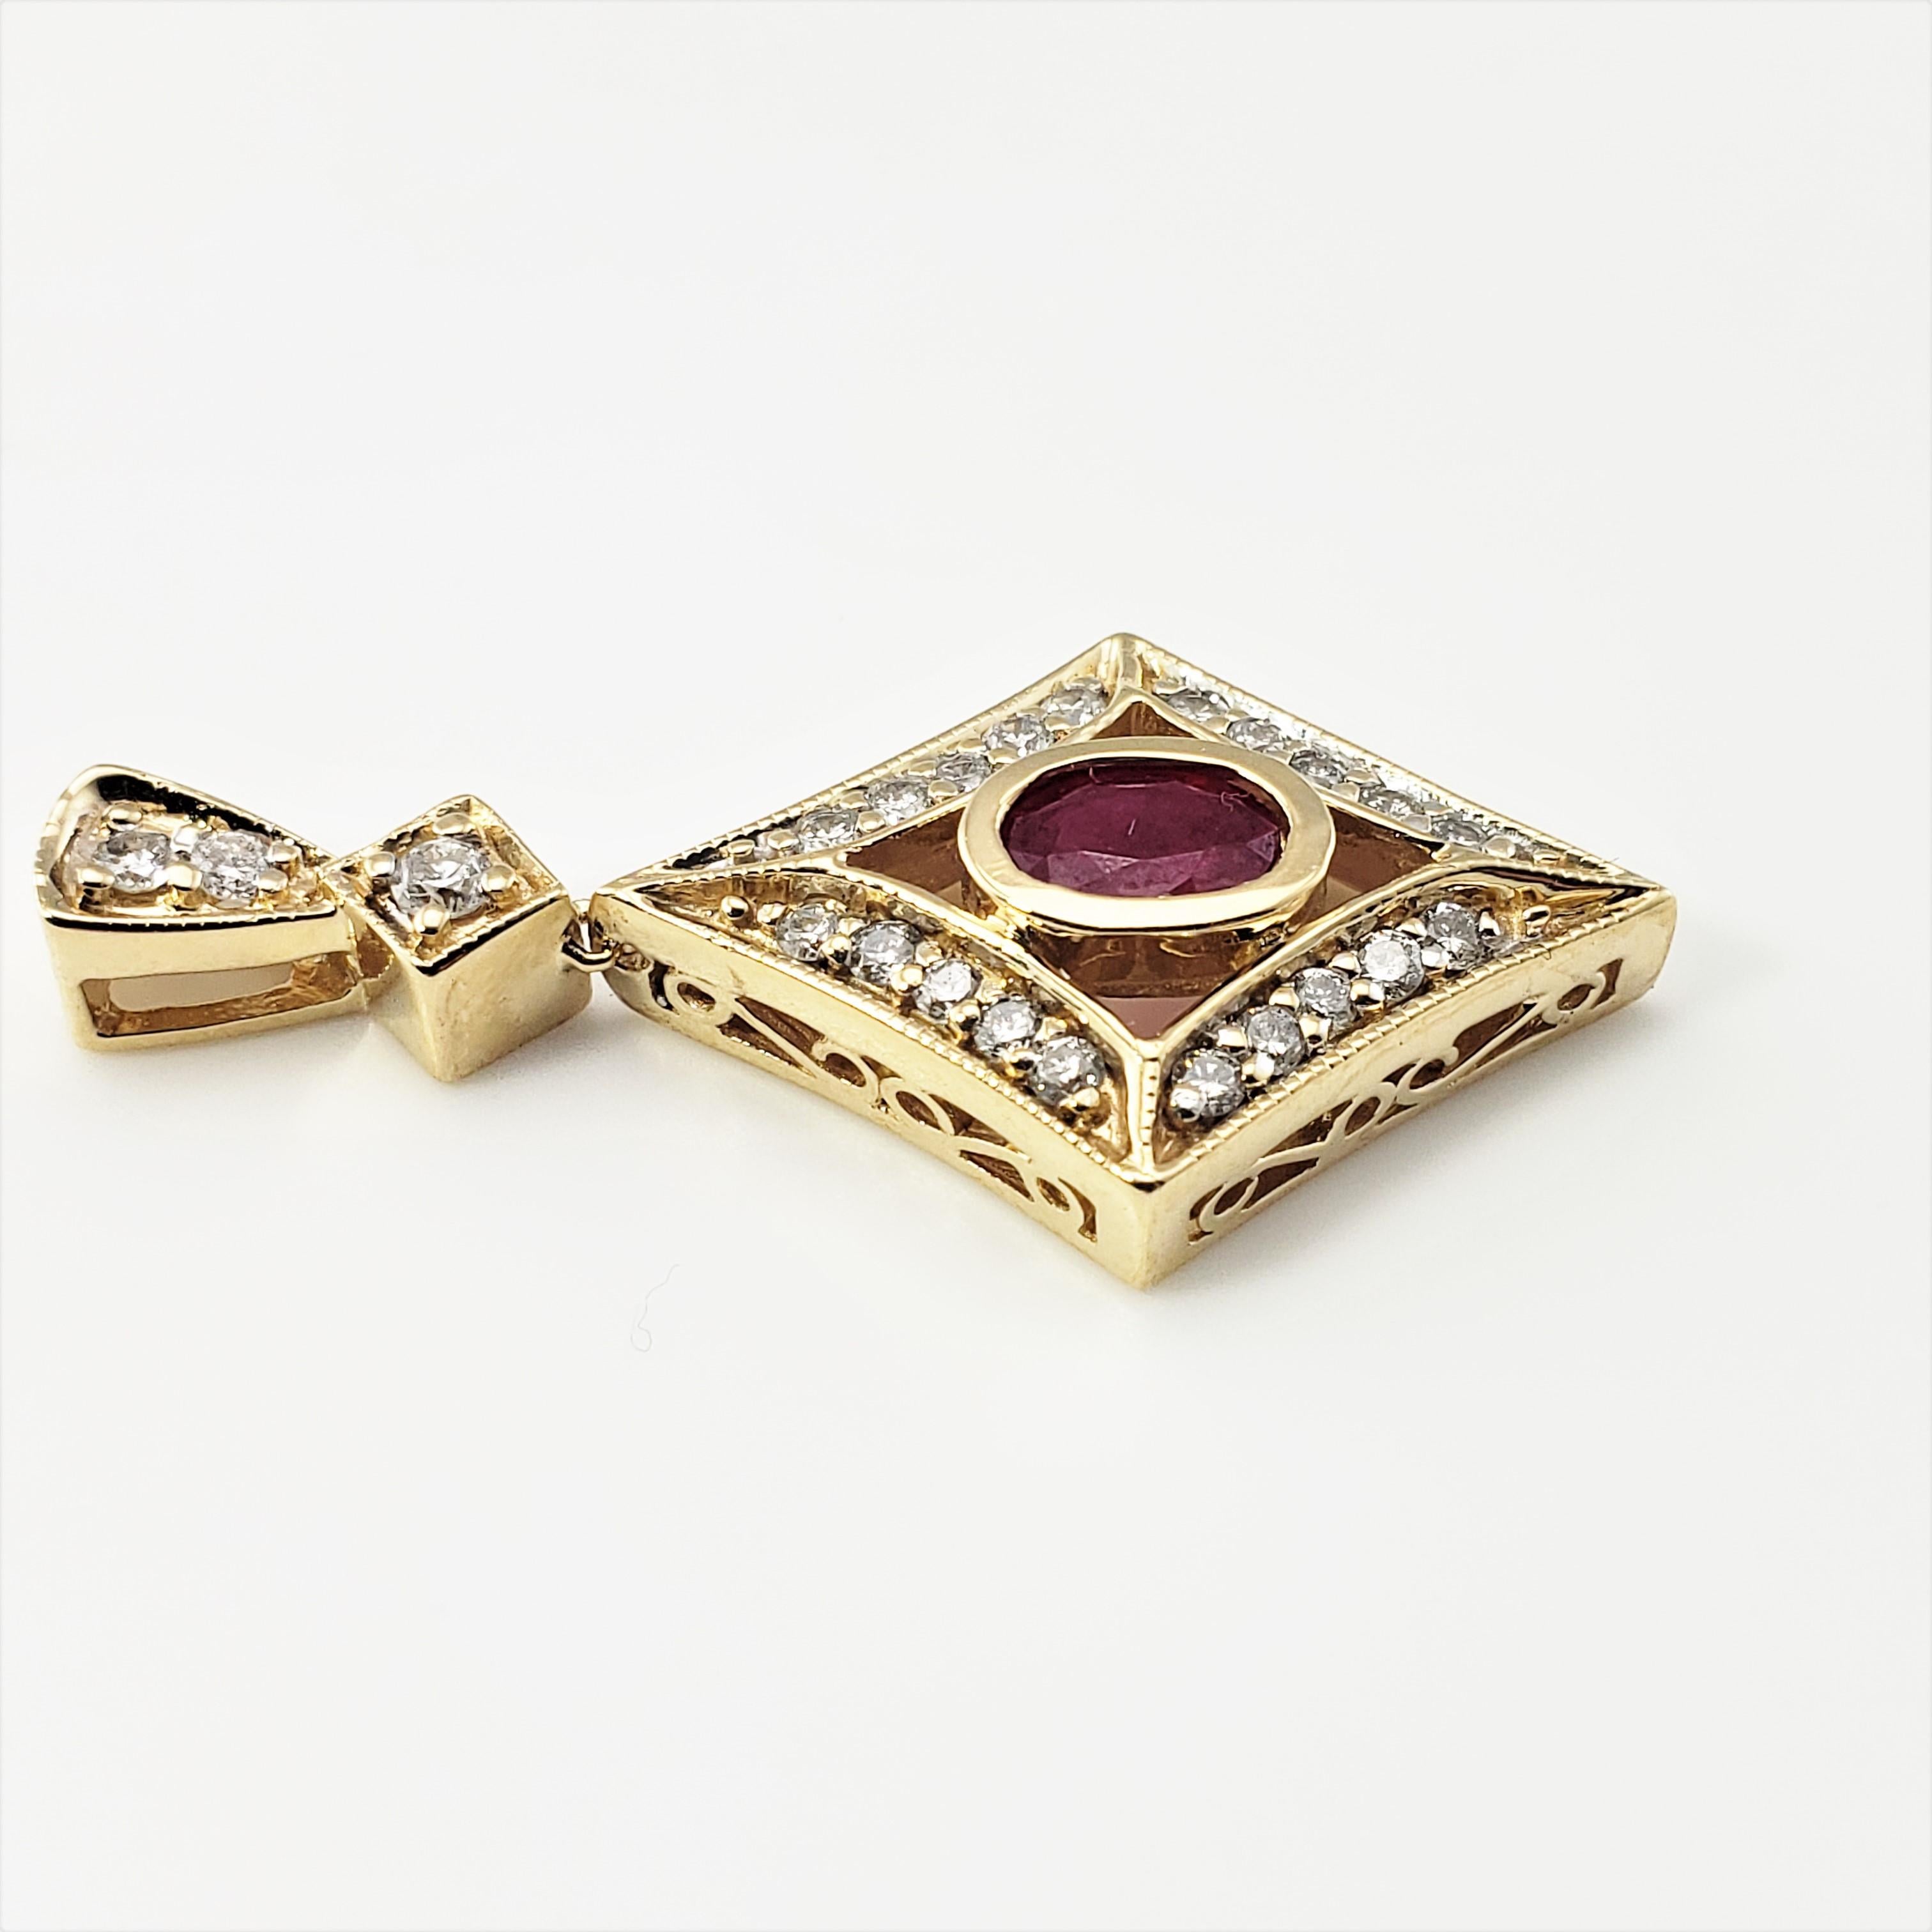 Vintage 14 Karat Yellow Gold Natural Ruby and Diamond Pendant-

This lovely pendant features one oval ruby (7 mm x 5 mm) and 20 round brilliant cut diamonds set in classic 14K yellow gold.

Approximate total diamond weight:  .47 ct.

Diamond color: 